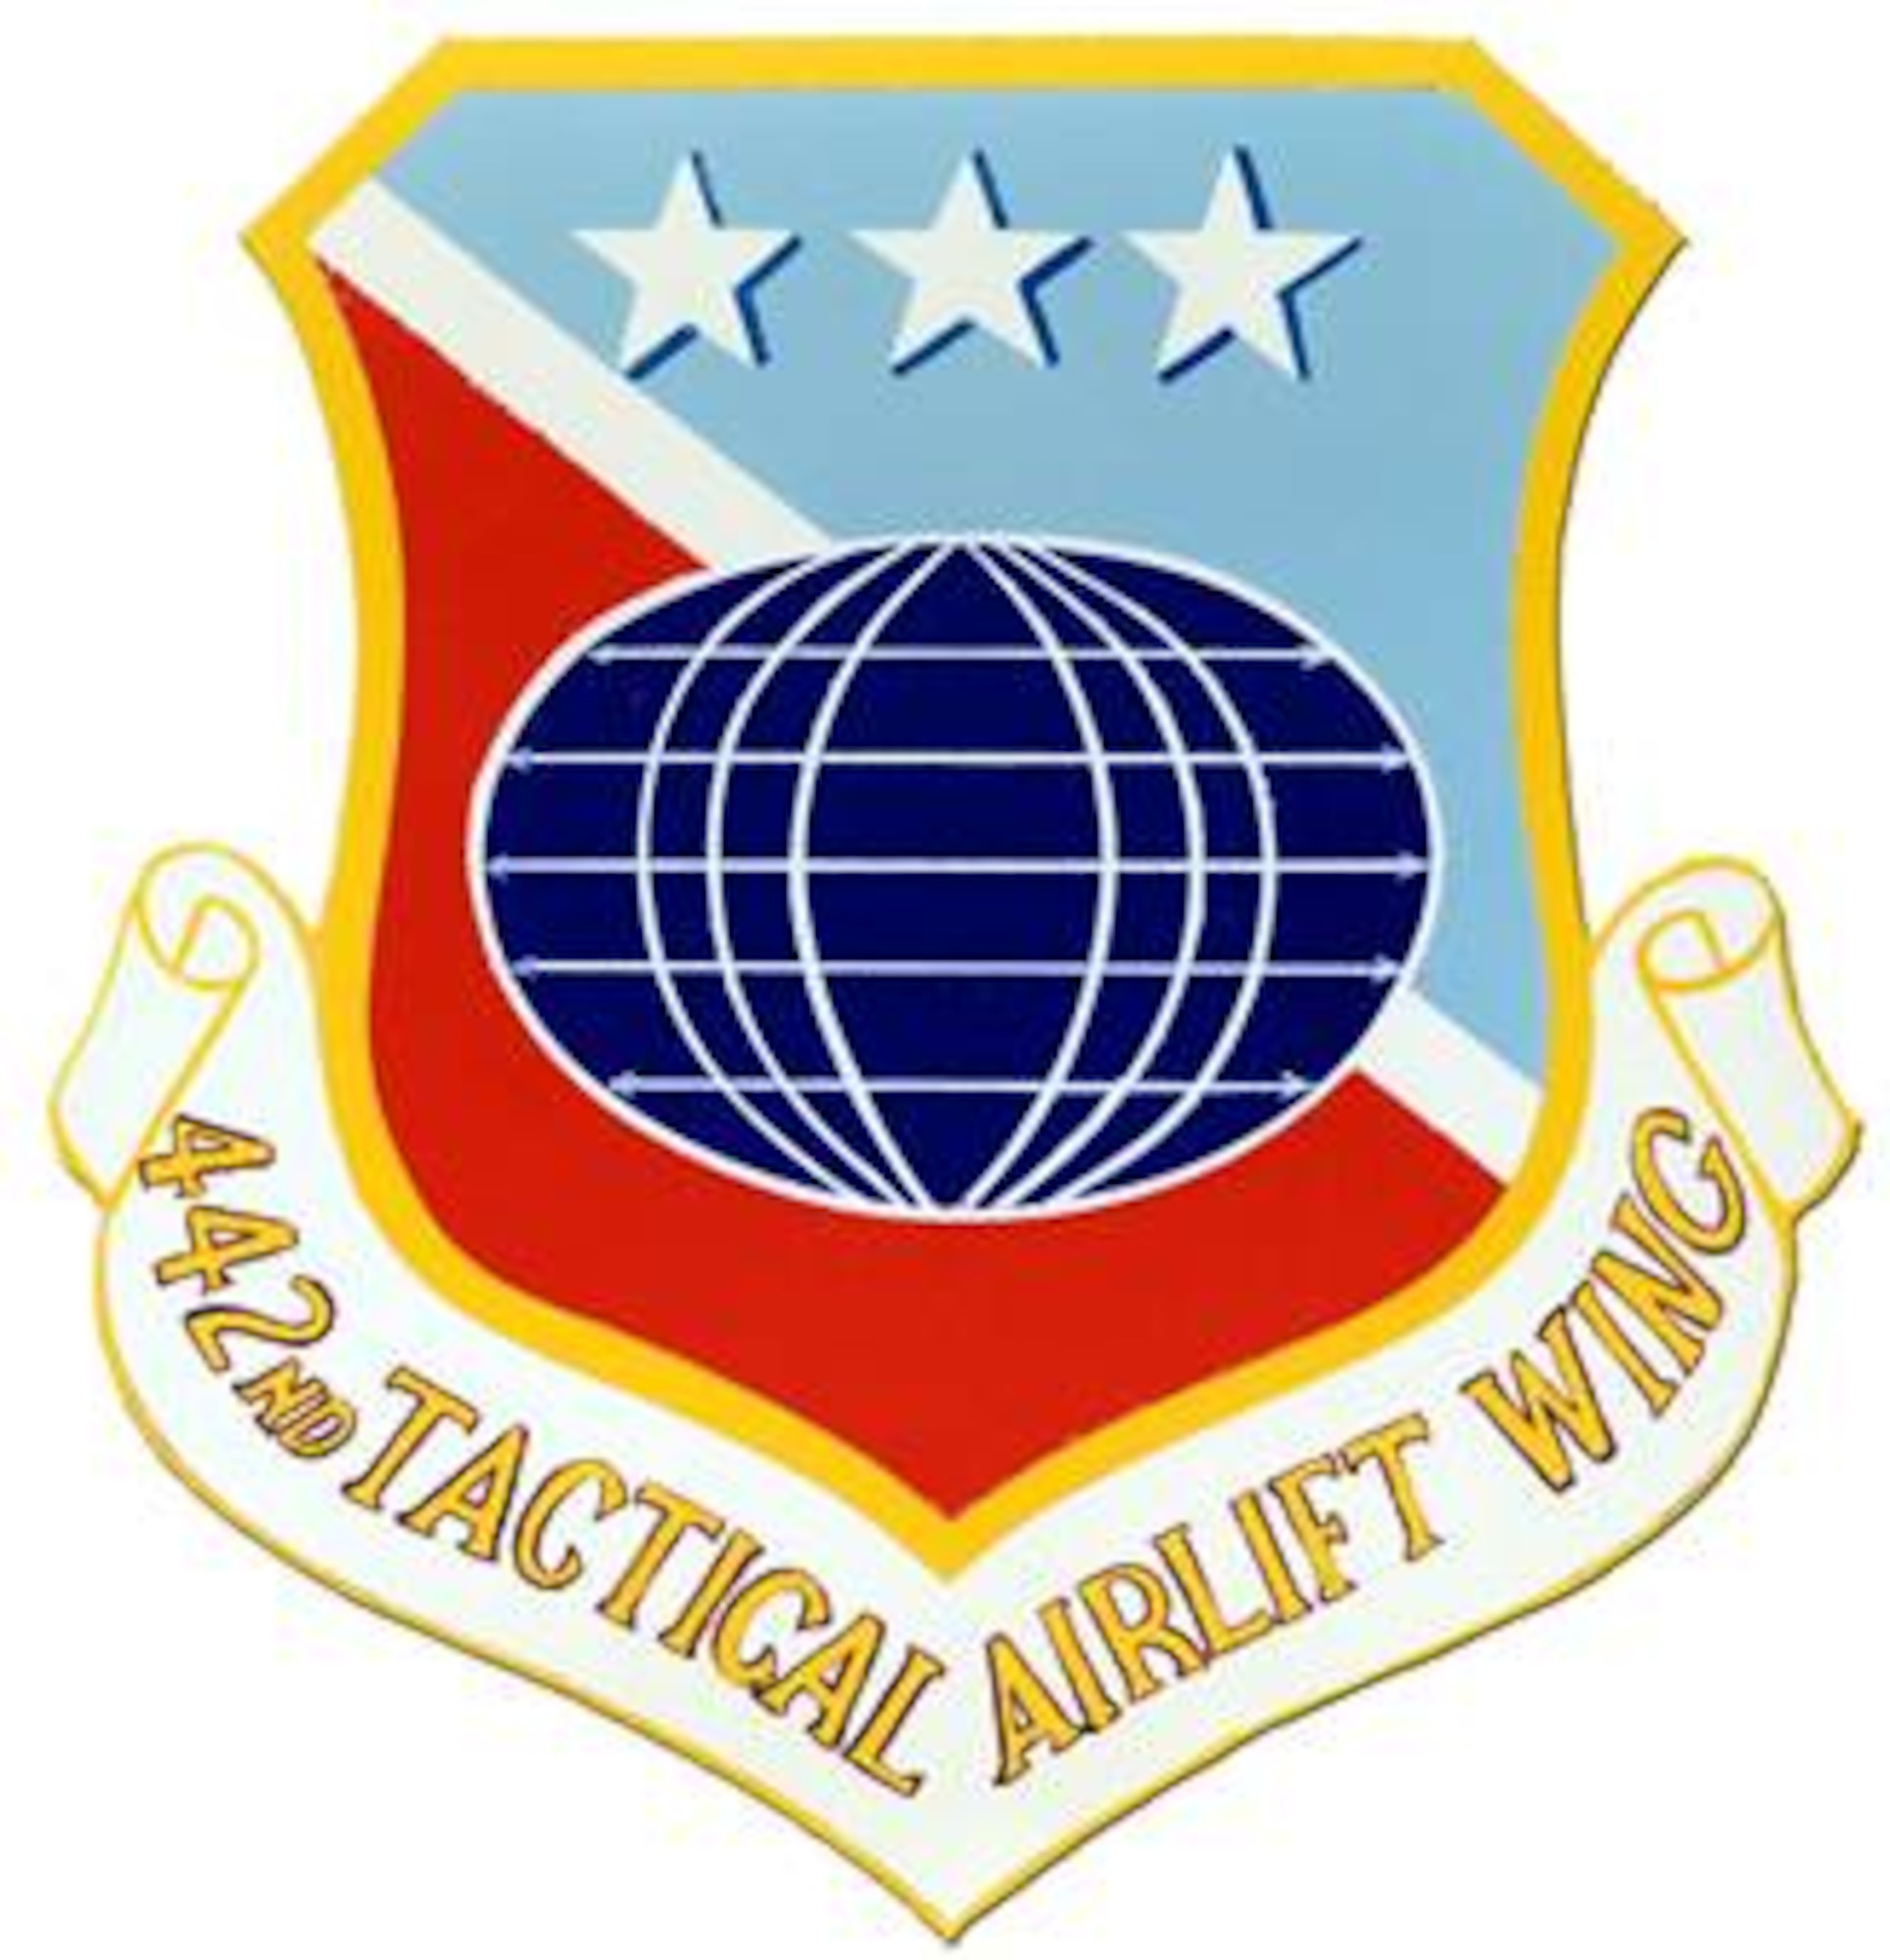 The wing shield of the 442nd Tactical Airlift Wing, which later became the 442nd Fighter Wing, an Air Force Reserve unit based at Whiteman Air Force Base, Mo.  The three stars represent the three tactical airlift squadrons in the wing at the time, along with a stylized globe.